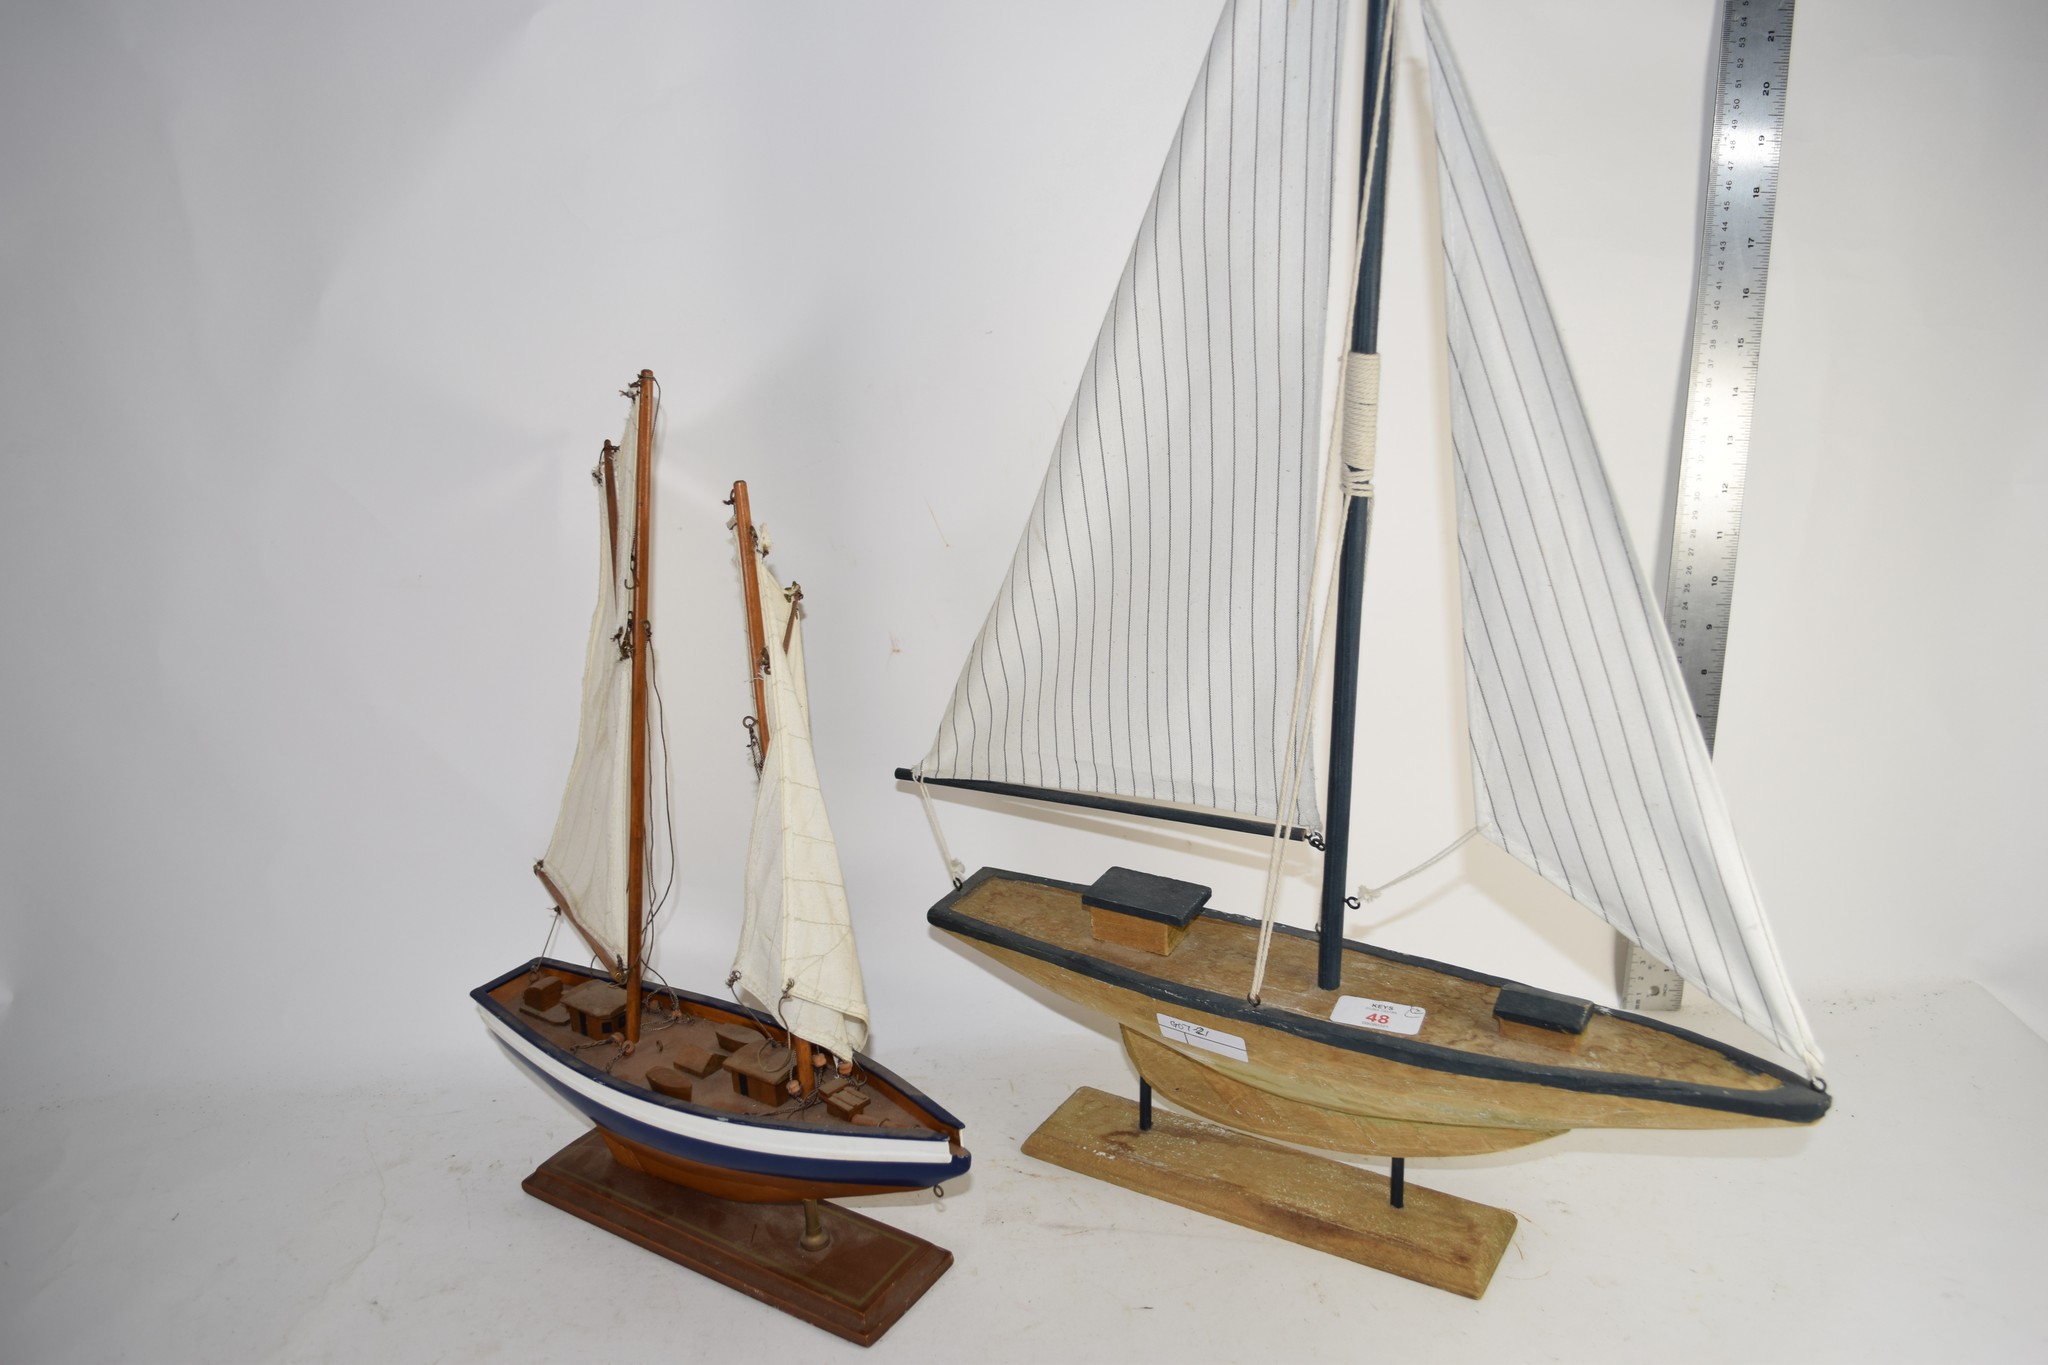 TWO SMALL MODELS OF A POND YACHTS ON WOODEN BASES